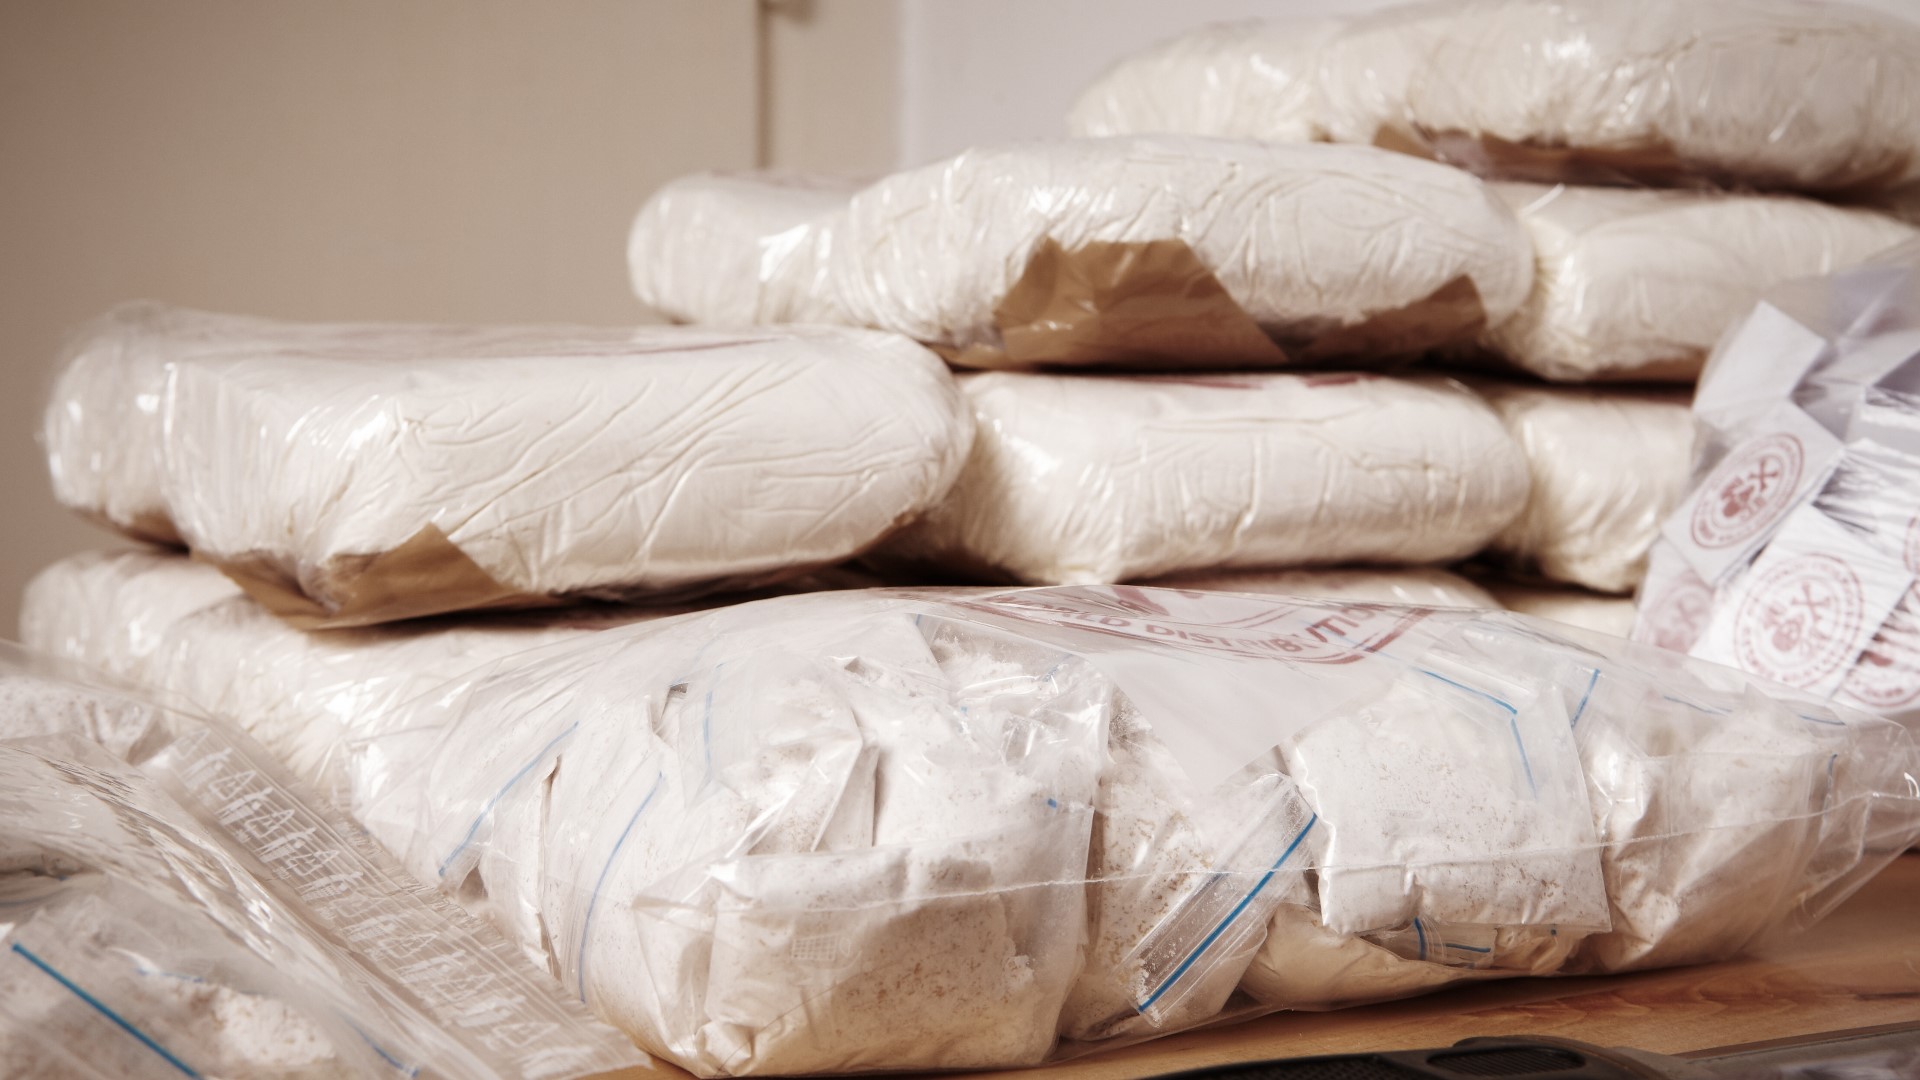 In total, prosecutors said more than 100 kg of cocaine had been shipped from Haiti to the U.S., amounting to more than $3 million.